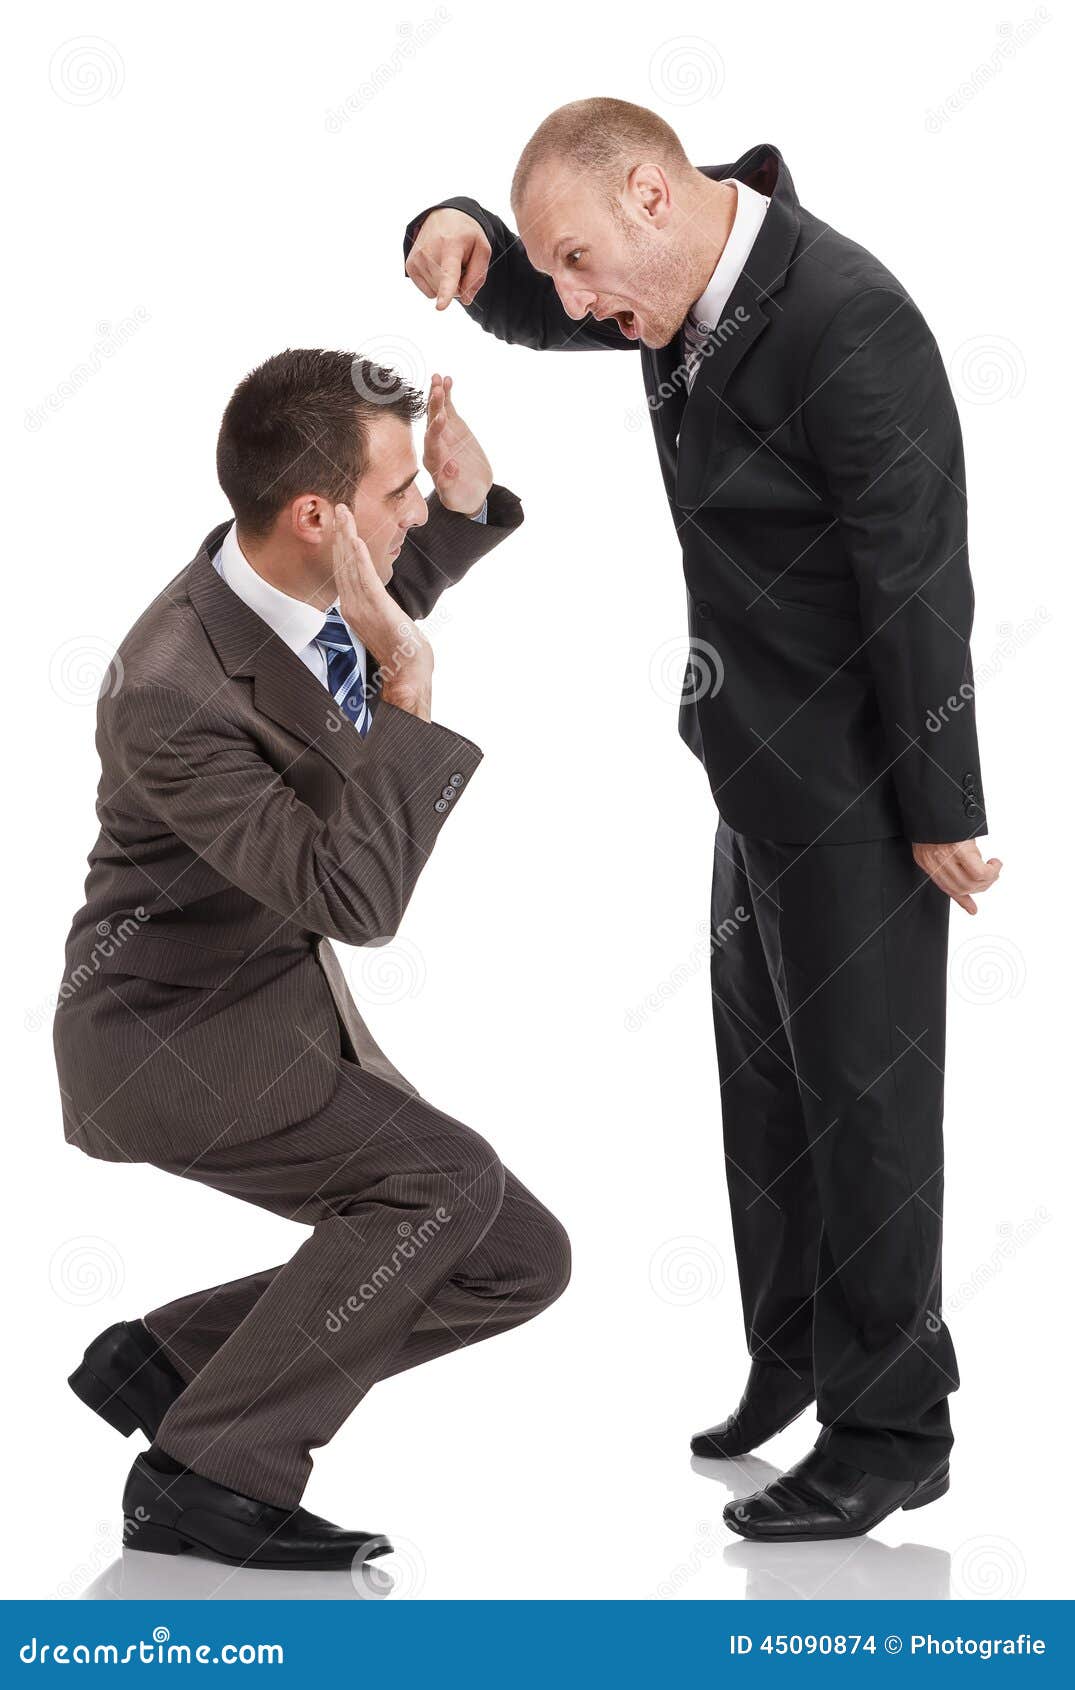 angry-employer-shouting-pointing-crouched-employee-dark-suit-brown-suit-isolated-white-45090874.jpg